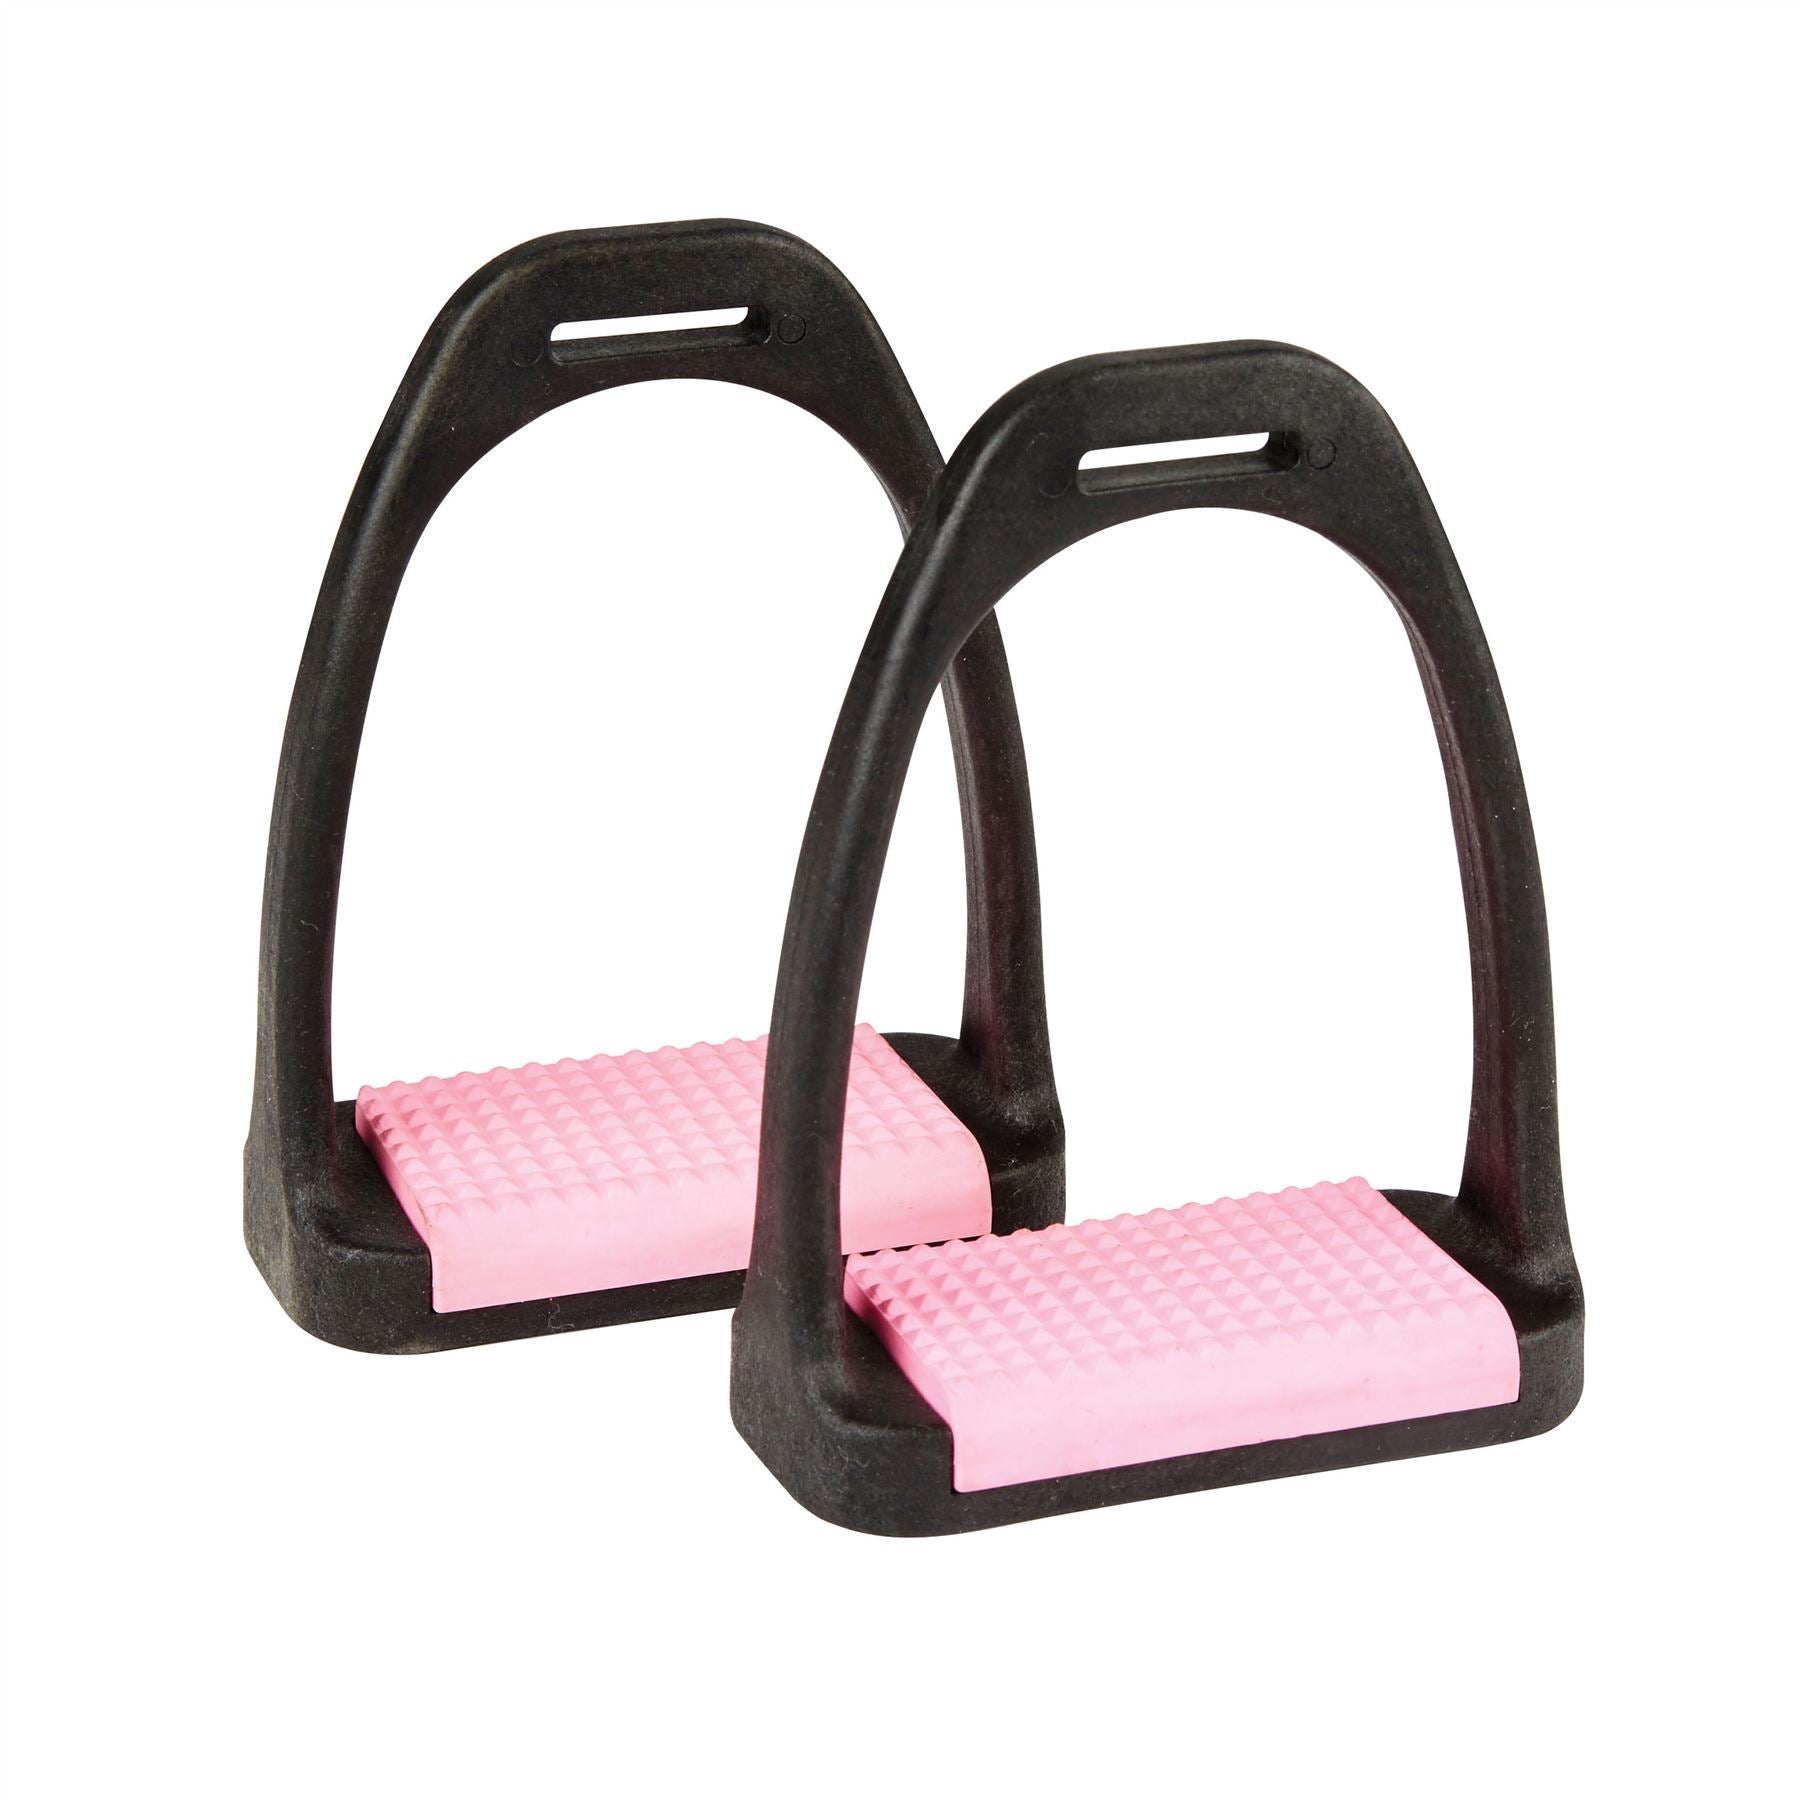 Korsteel Polymer Stirrup Irons With Coloured Treads - Just Horse Riders